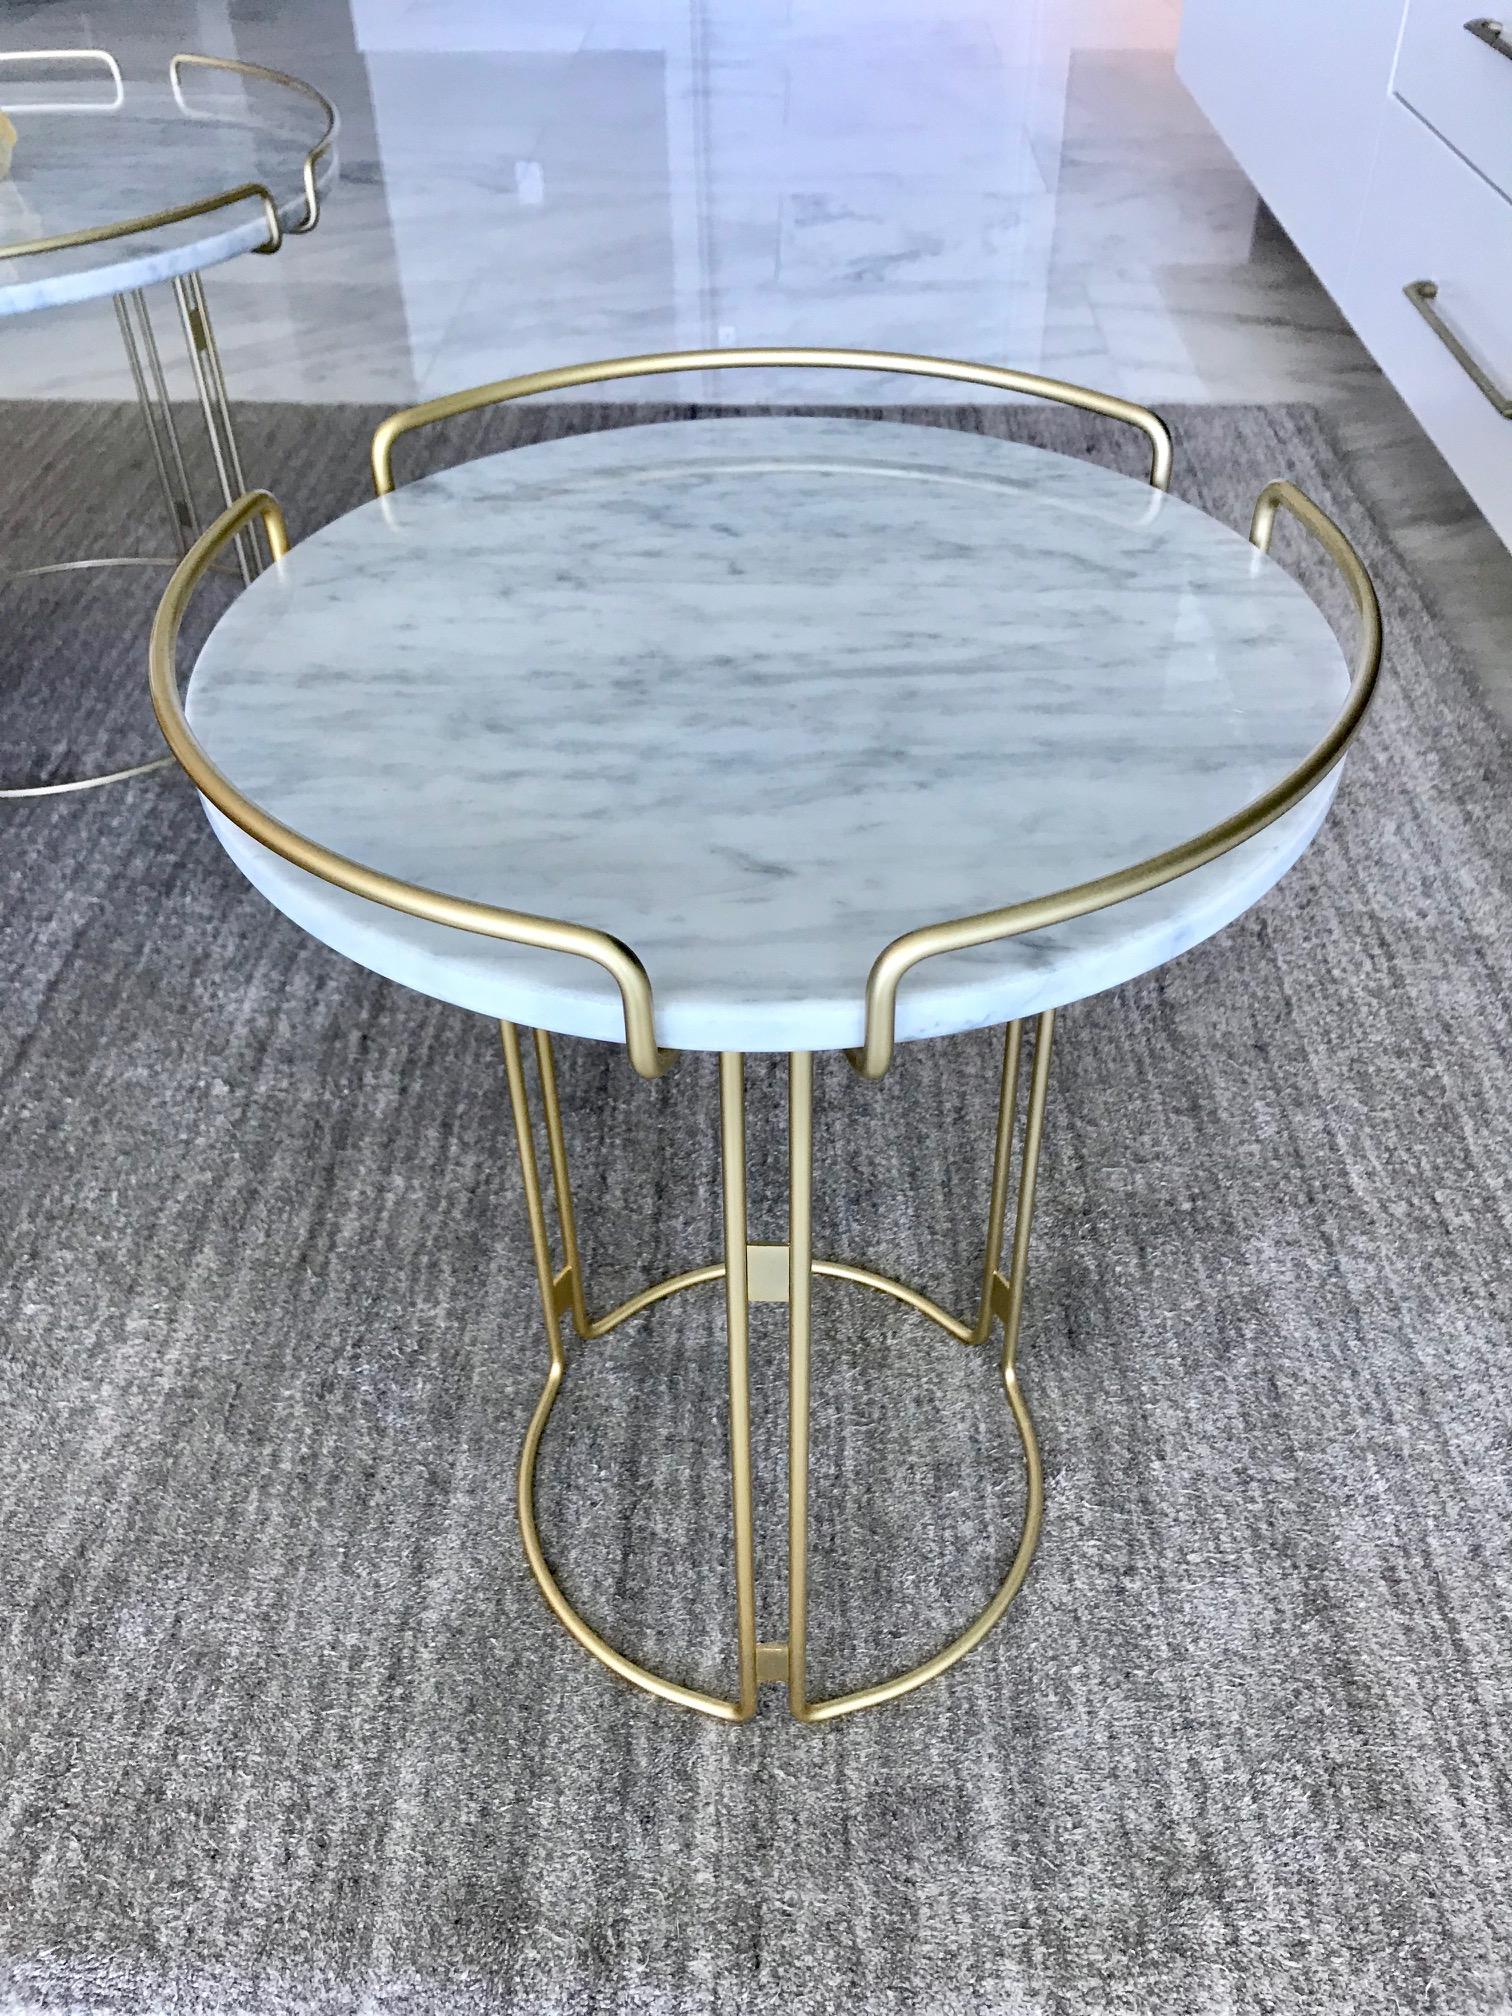 Stunning side table or drinks table designed by Fabrice Berrux for Roche Bobois. Table has a Mid-Century Modern inspired design. Features white Carrara marble top with round three-sided steel wire frame in lacquered matte gold or satin brass finish.